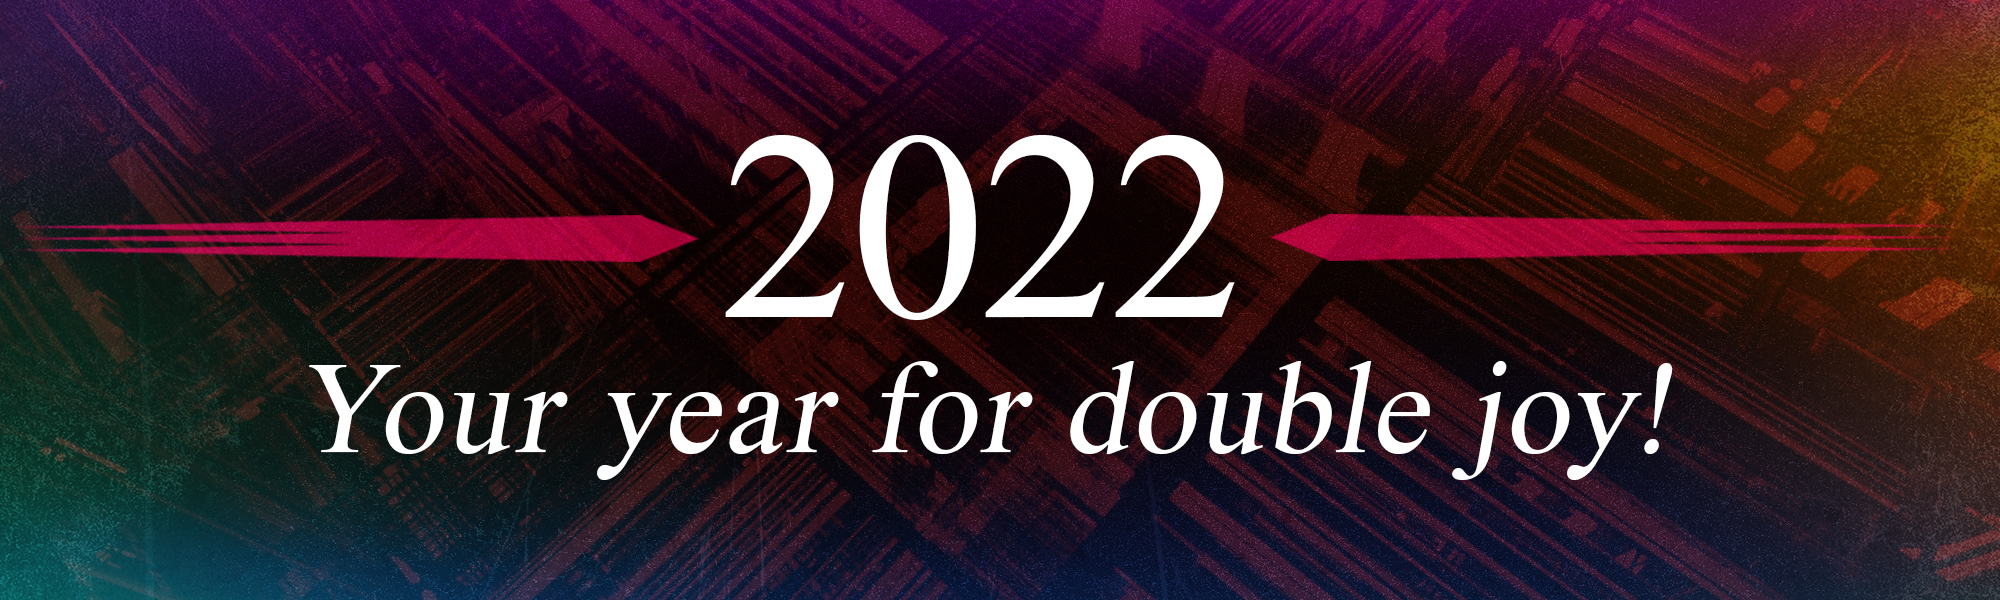 2022 Your year for double joy!